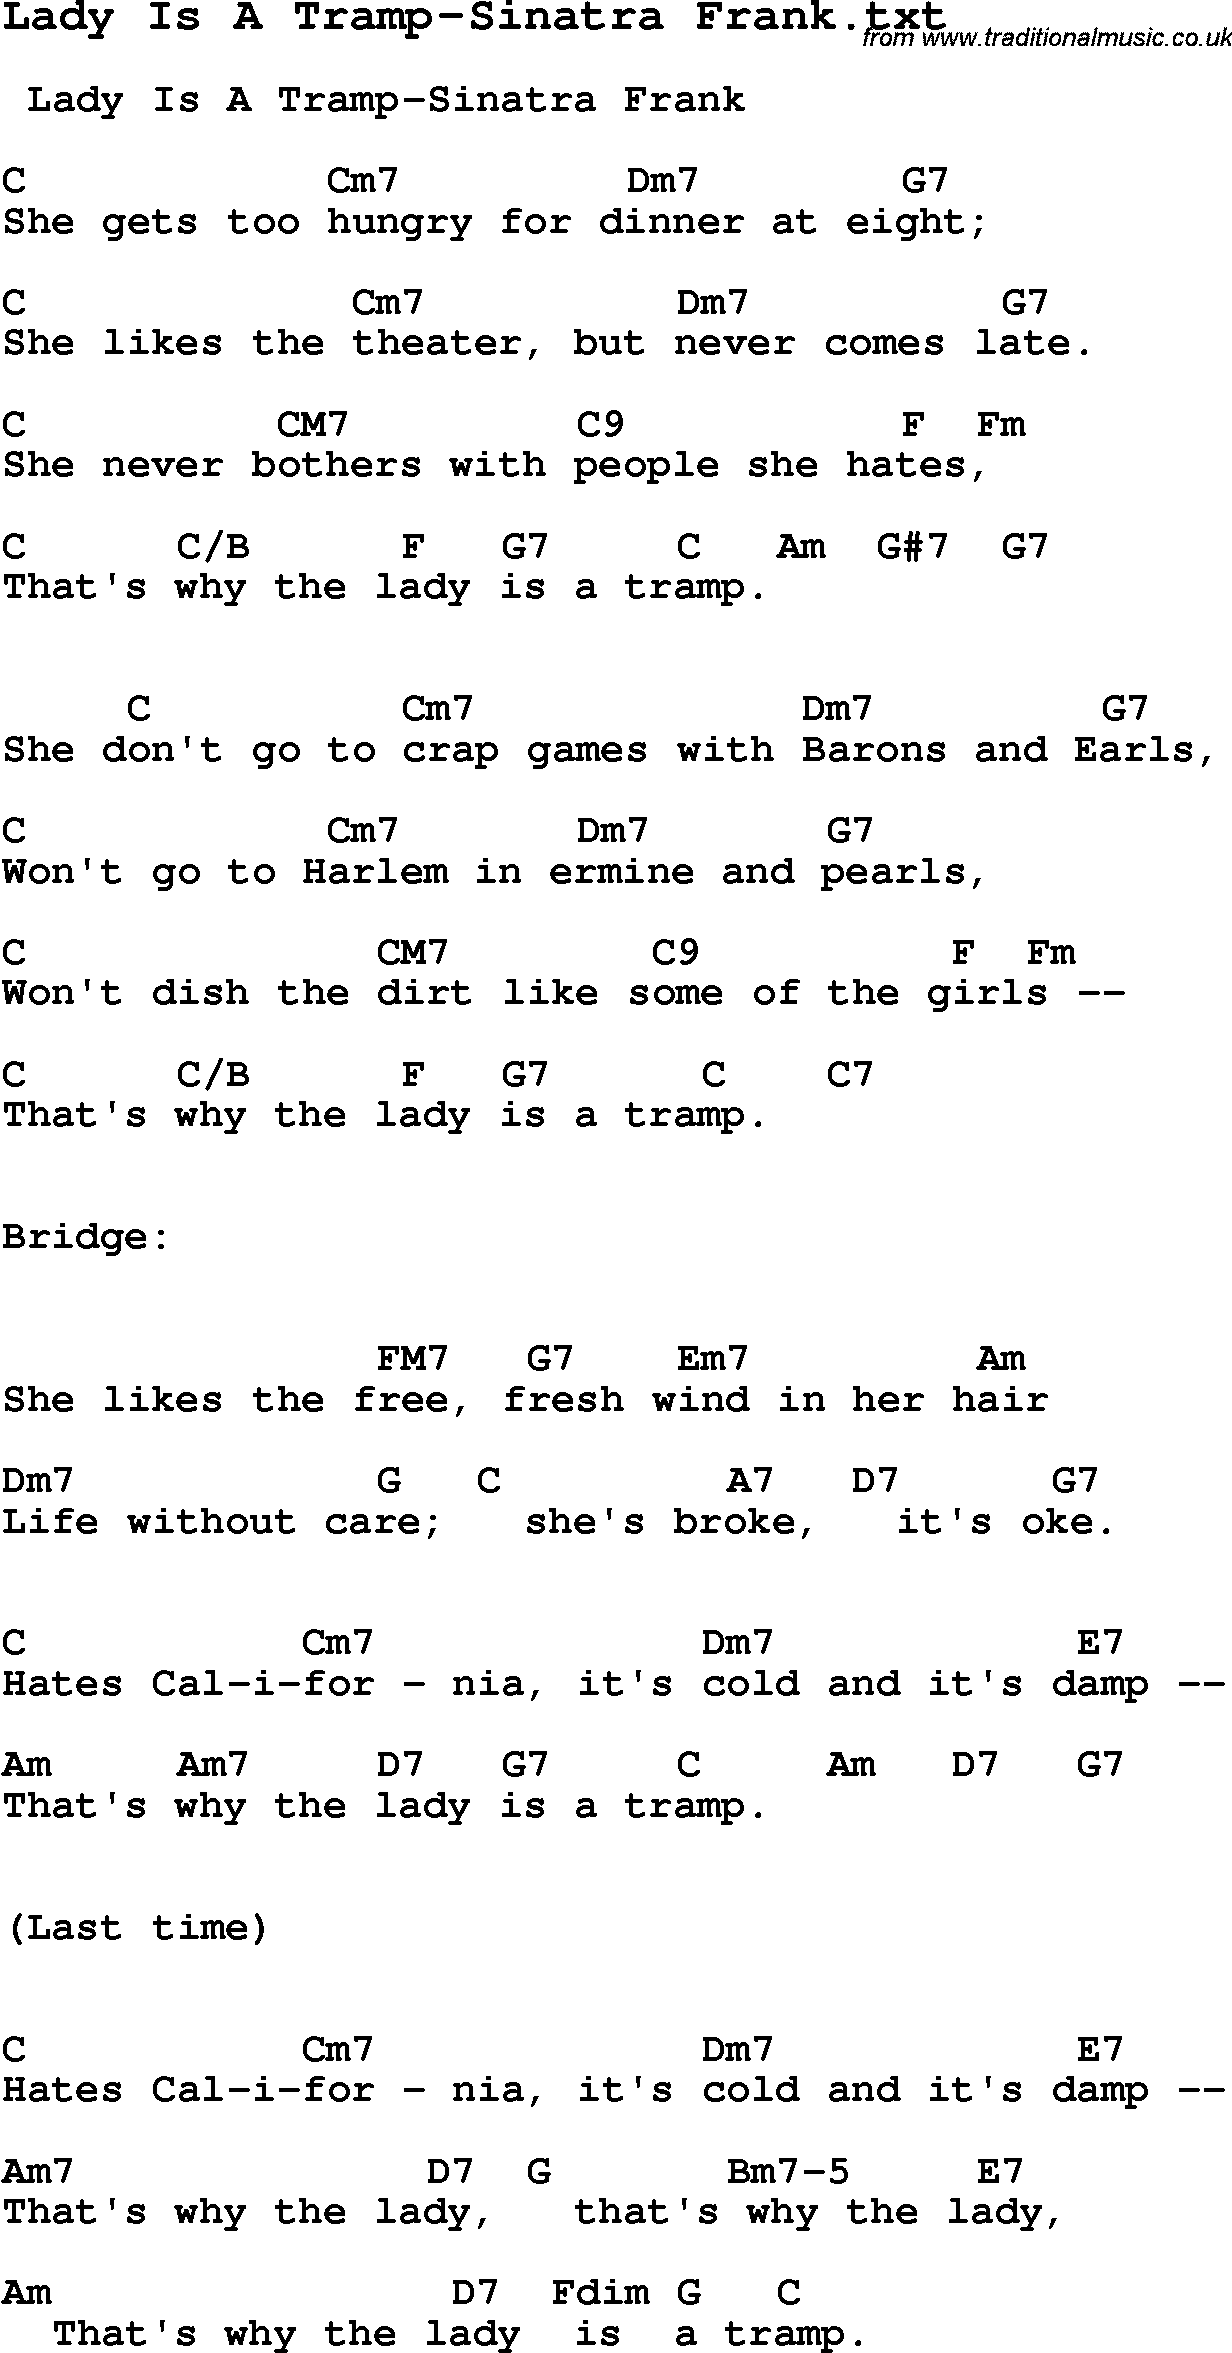 Jazz Song from top bands and vocal artists with chords, tabs and lyrics - Lady Is A Tramp-Sinatra Frank